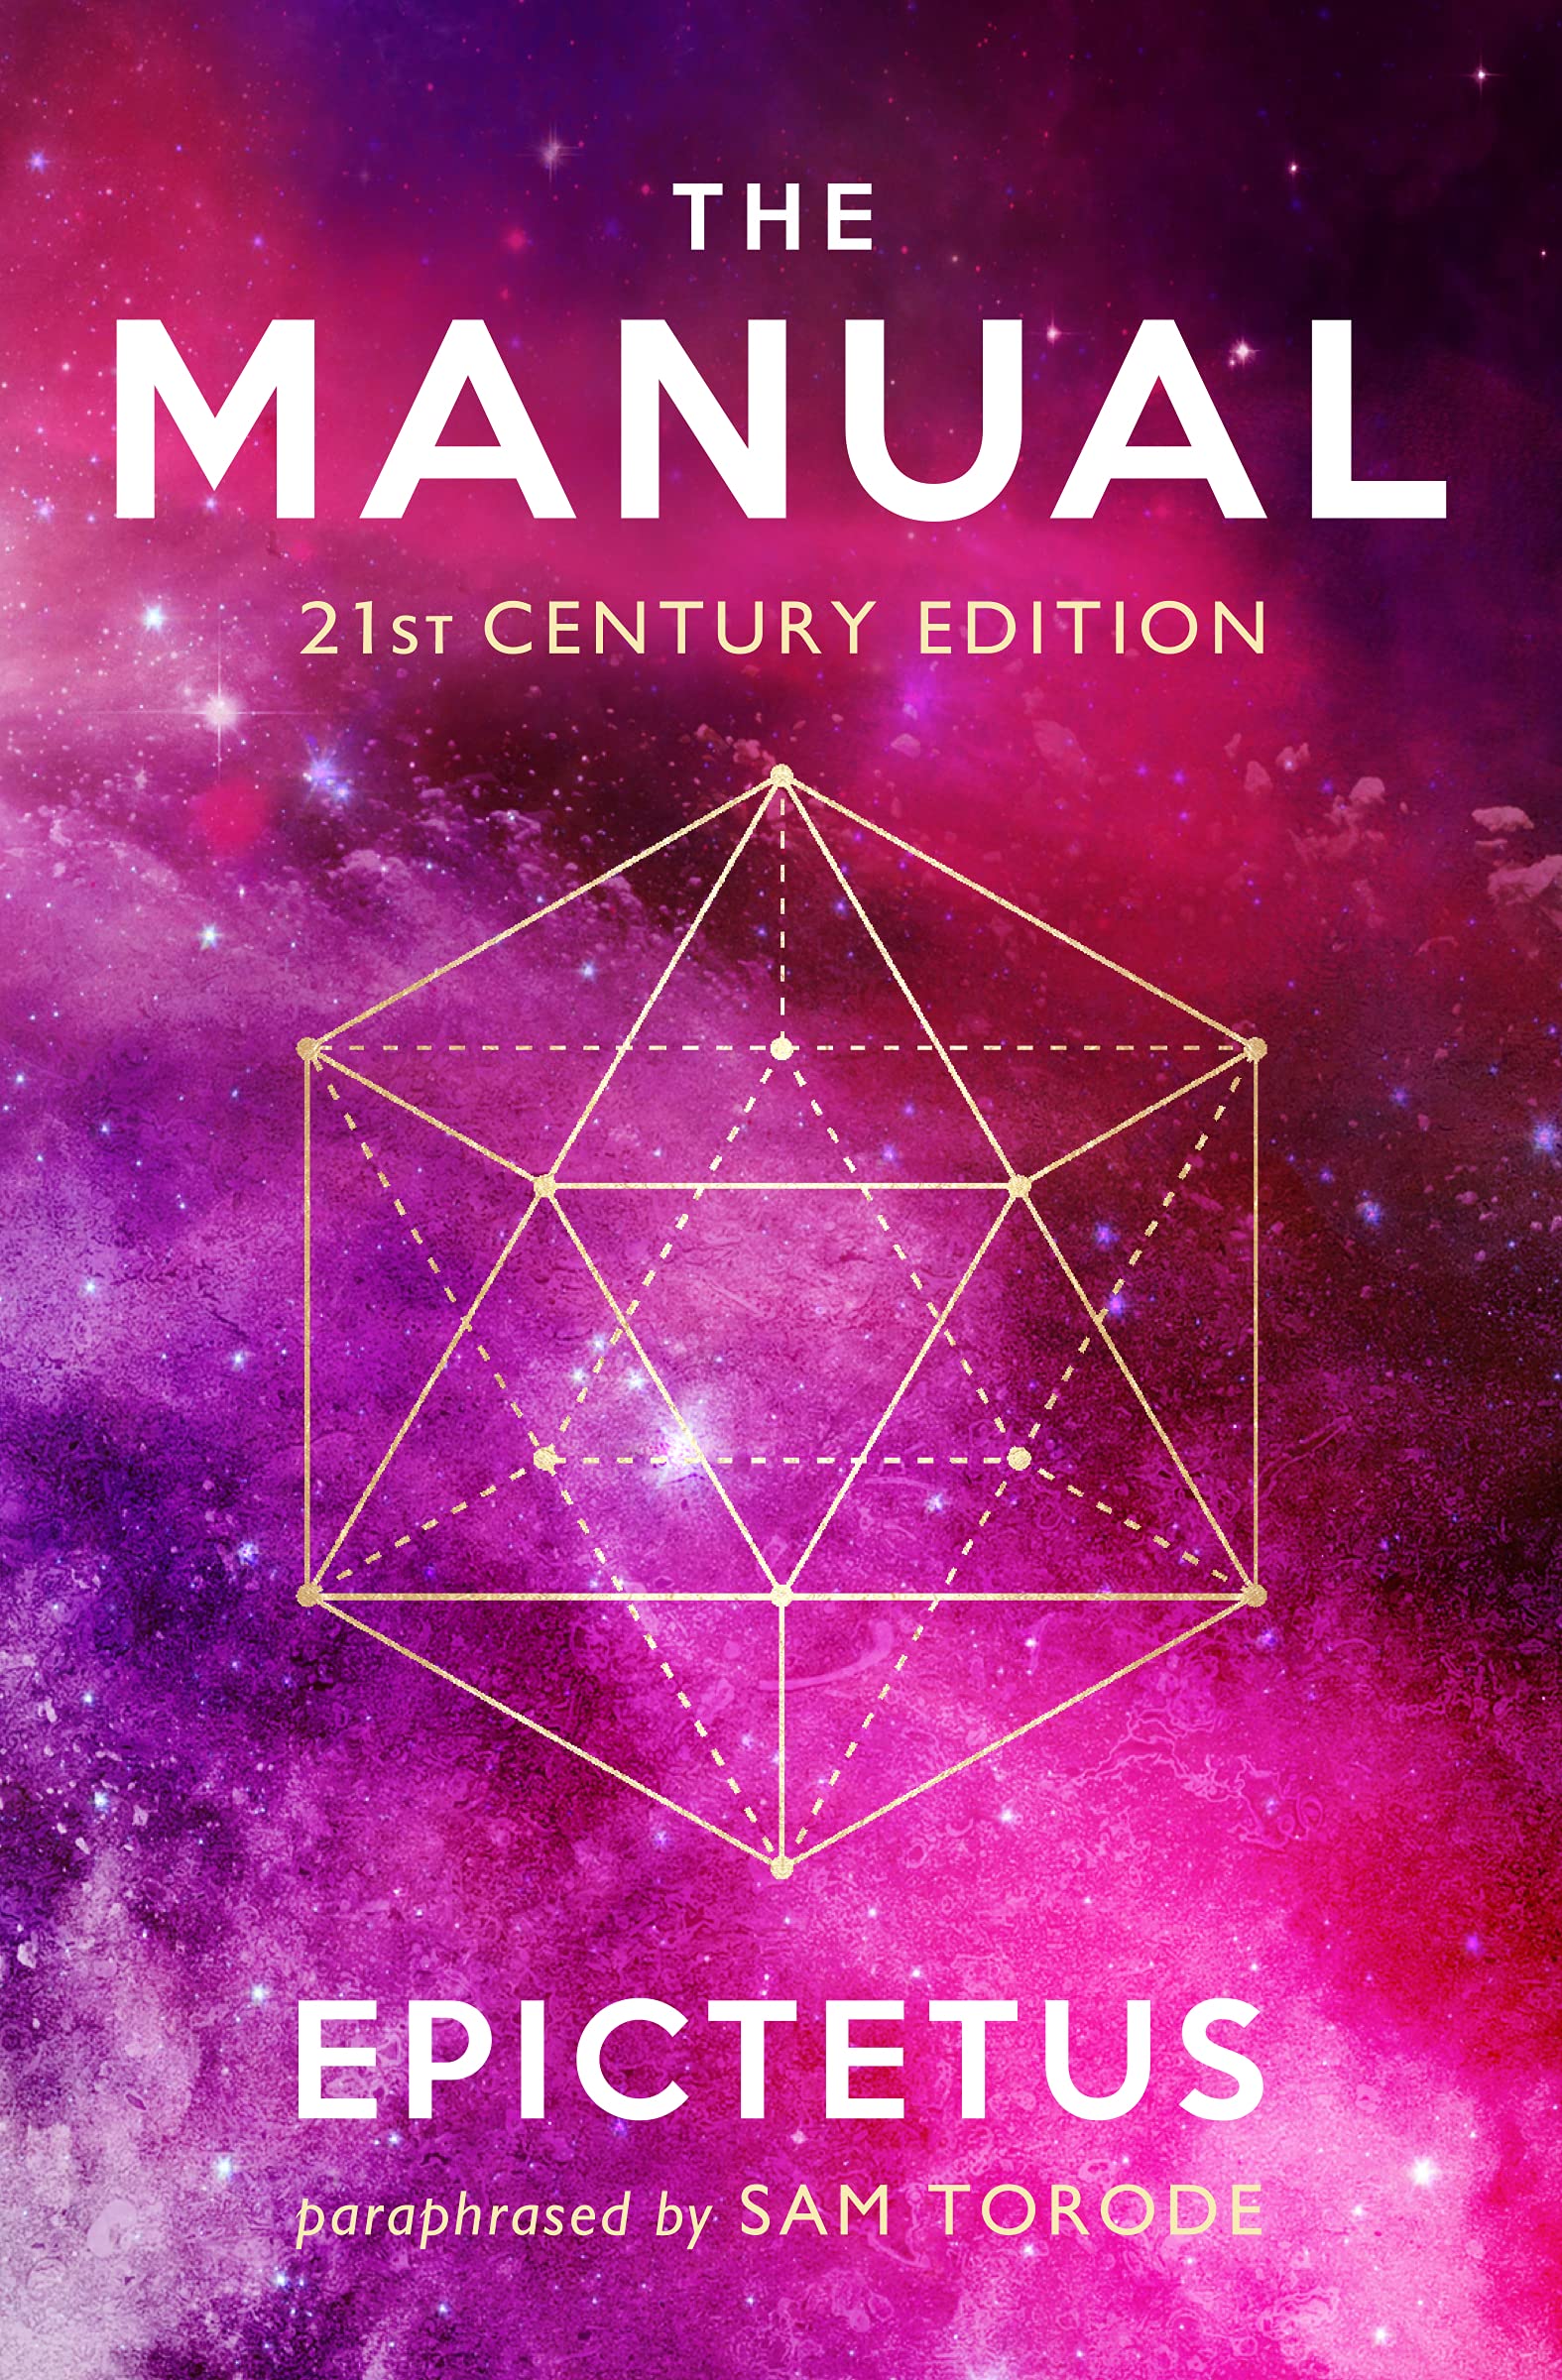 The Manual: 21st Century Edition by Epictetus and Sam Torode